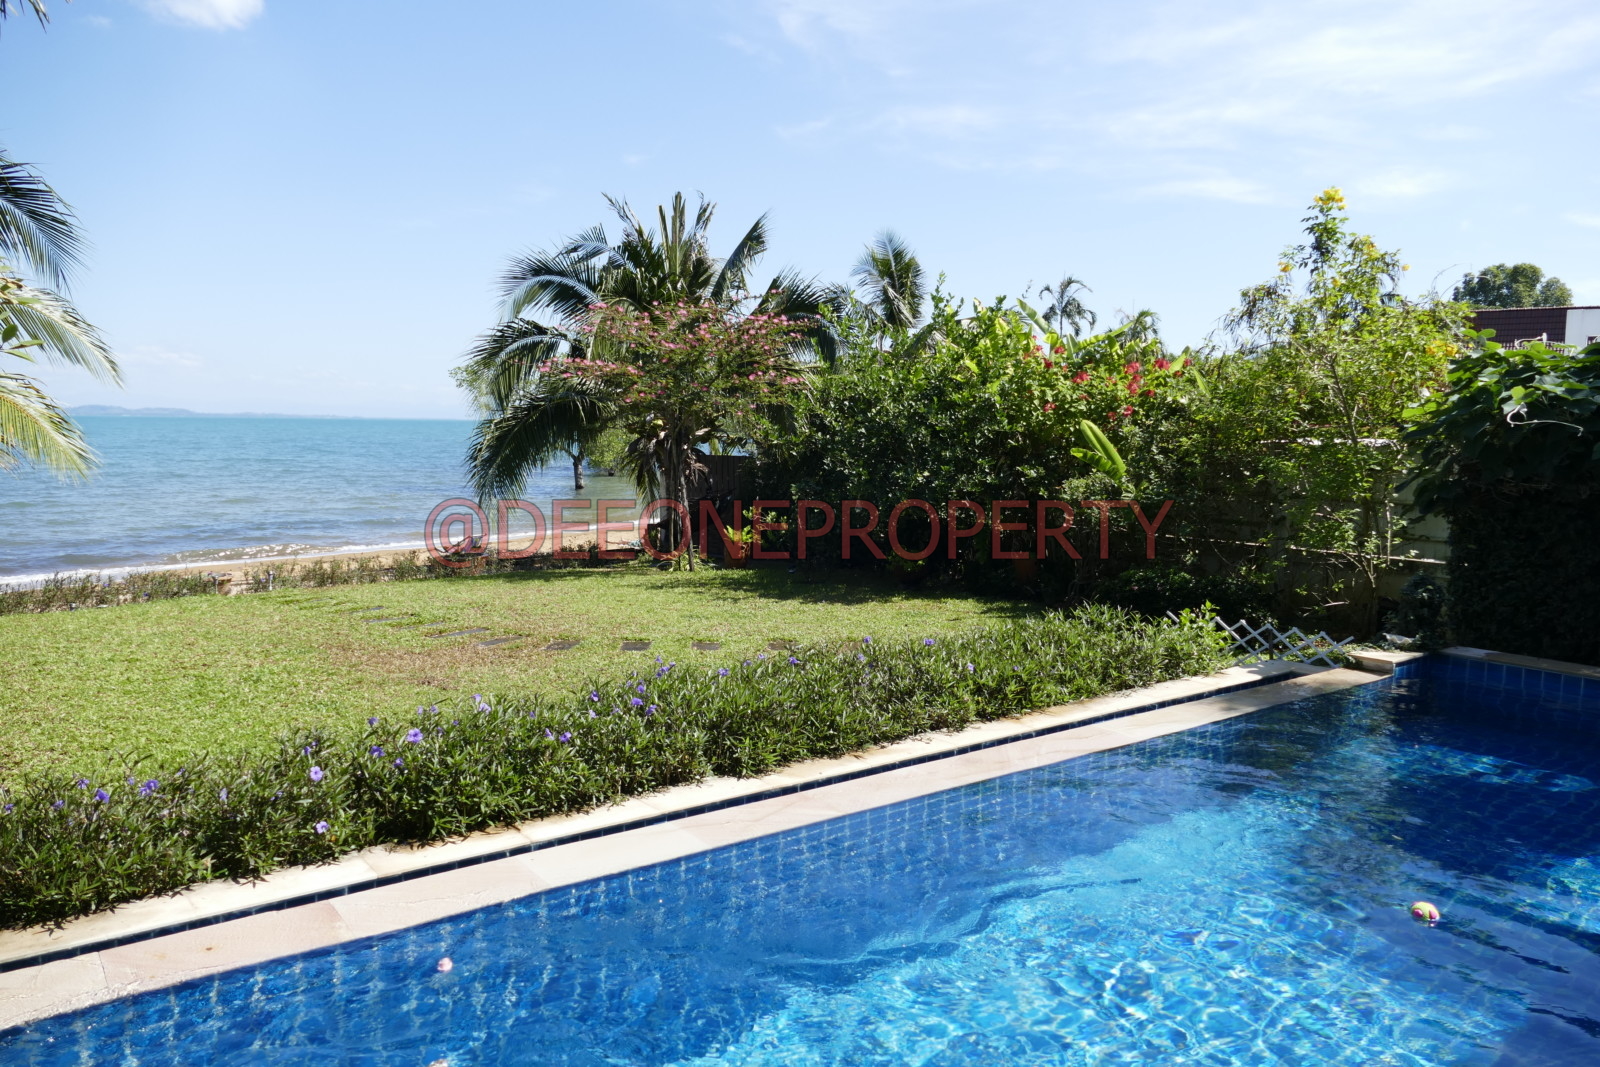 6 Bedrooms Beachfront Villa for Sale – North East Coast, Koh Chang